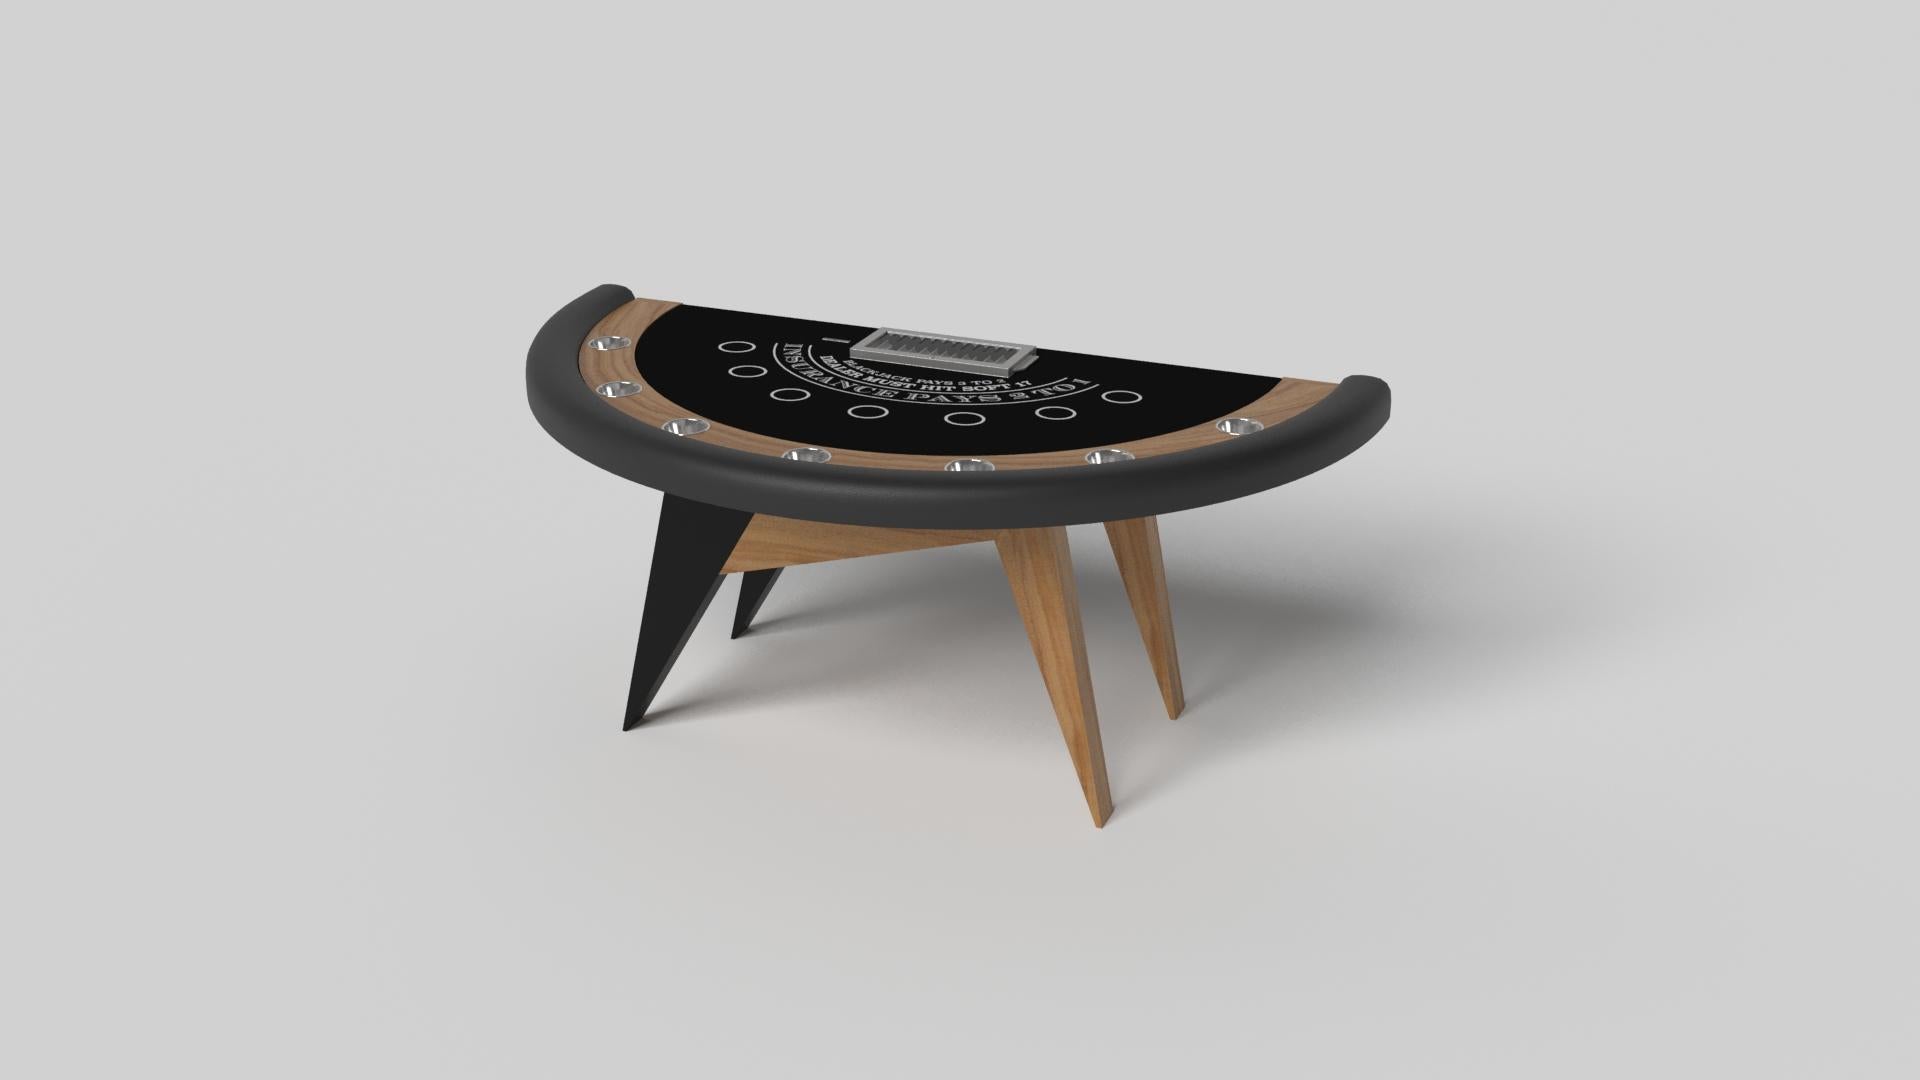 Simple yet sophisticated, the Mantis blackjack table puts a fresh, modern spin on a classic four-legged design. Sharp angles and tapered legs provide sleek stability.

Size:

88”X46”X30” (Bar Height)
Custom Sizes Available Per Request